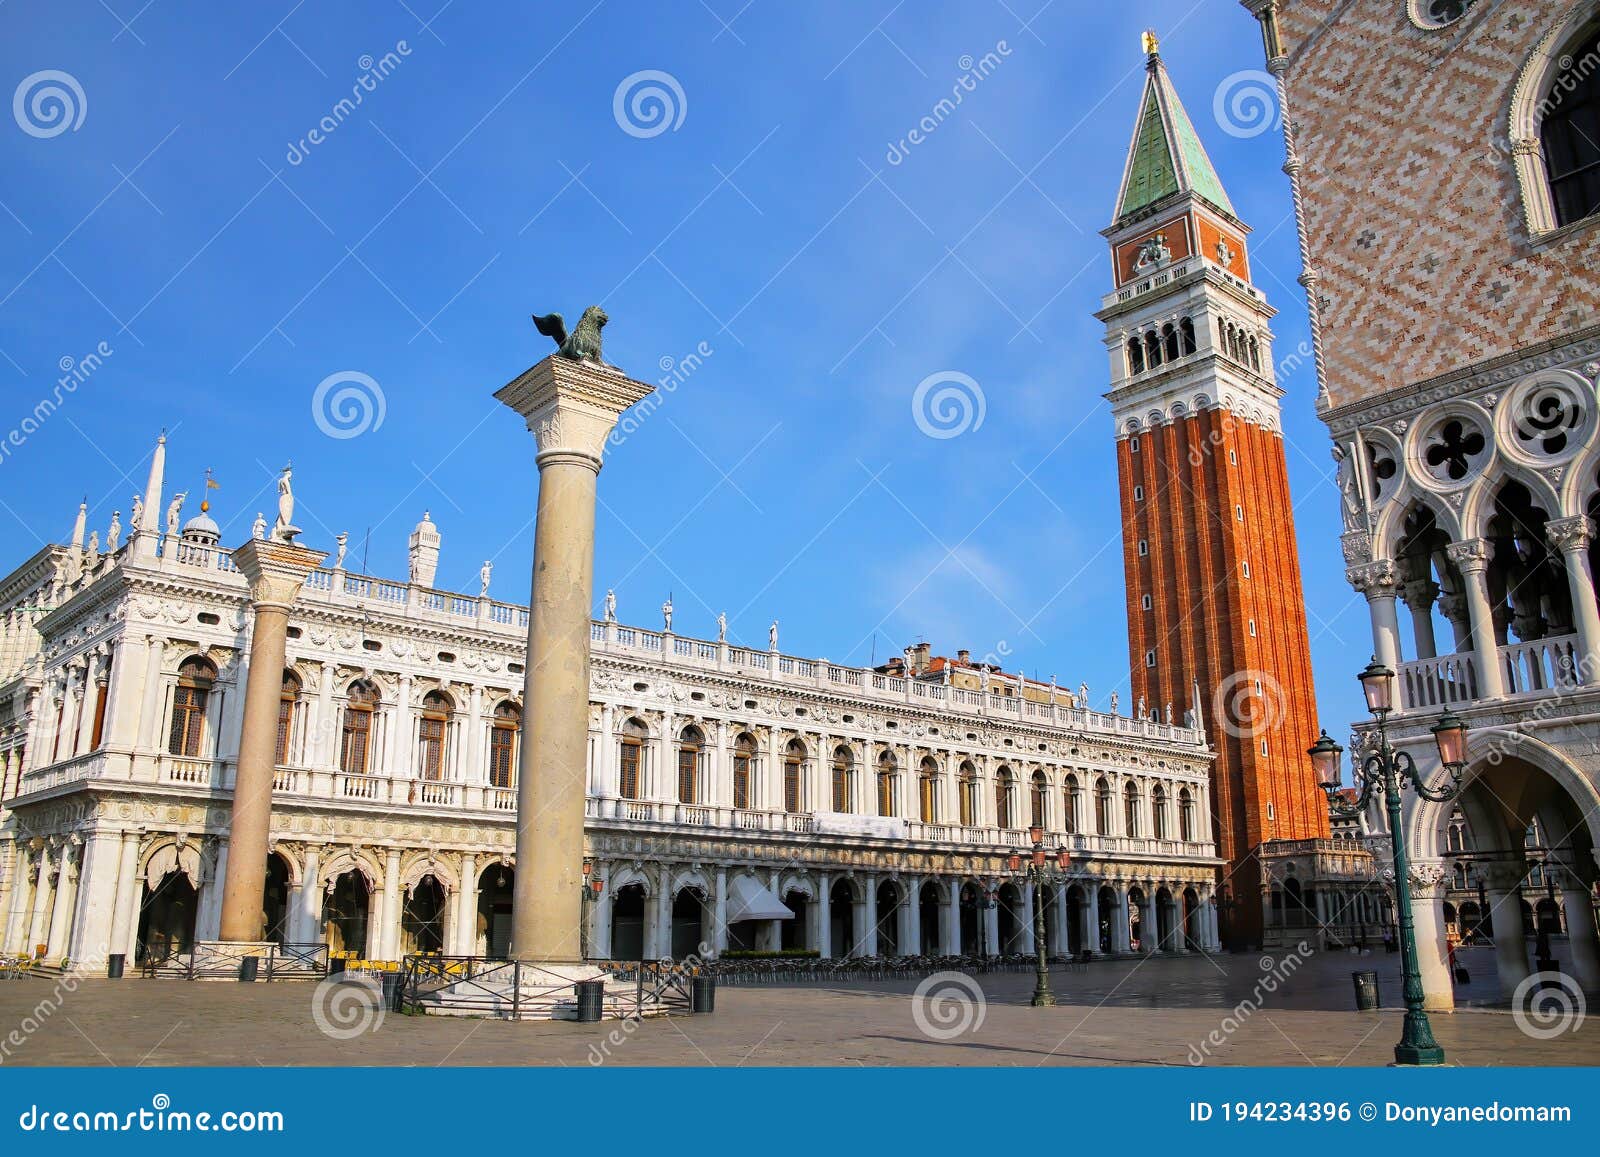 view of piazzetta san marco with st mark`s campanile, lion of venice statue, biblioteca and palazzo ducale in venice, italy